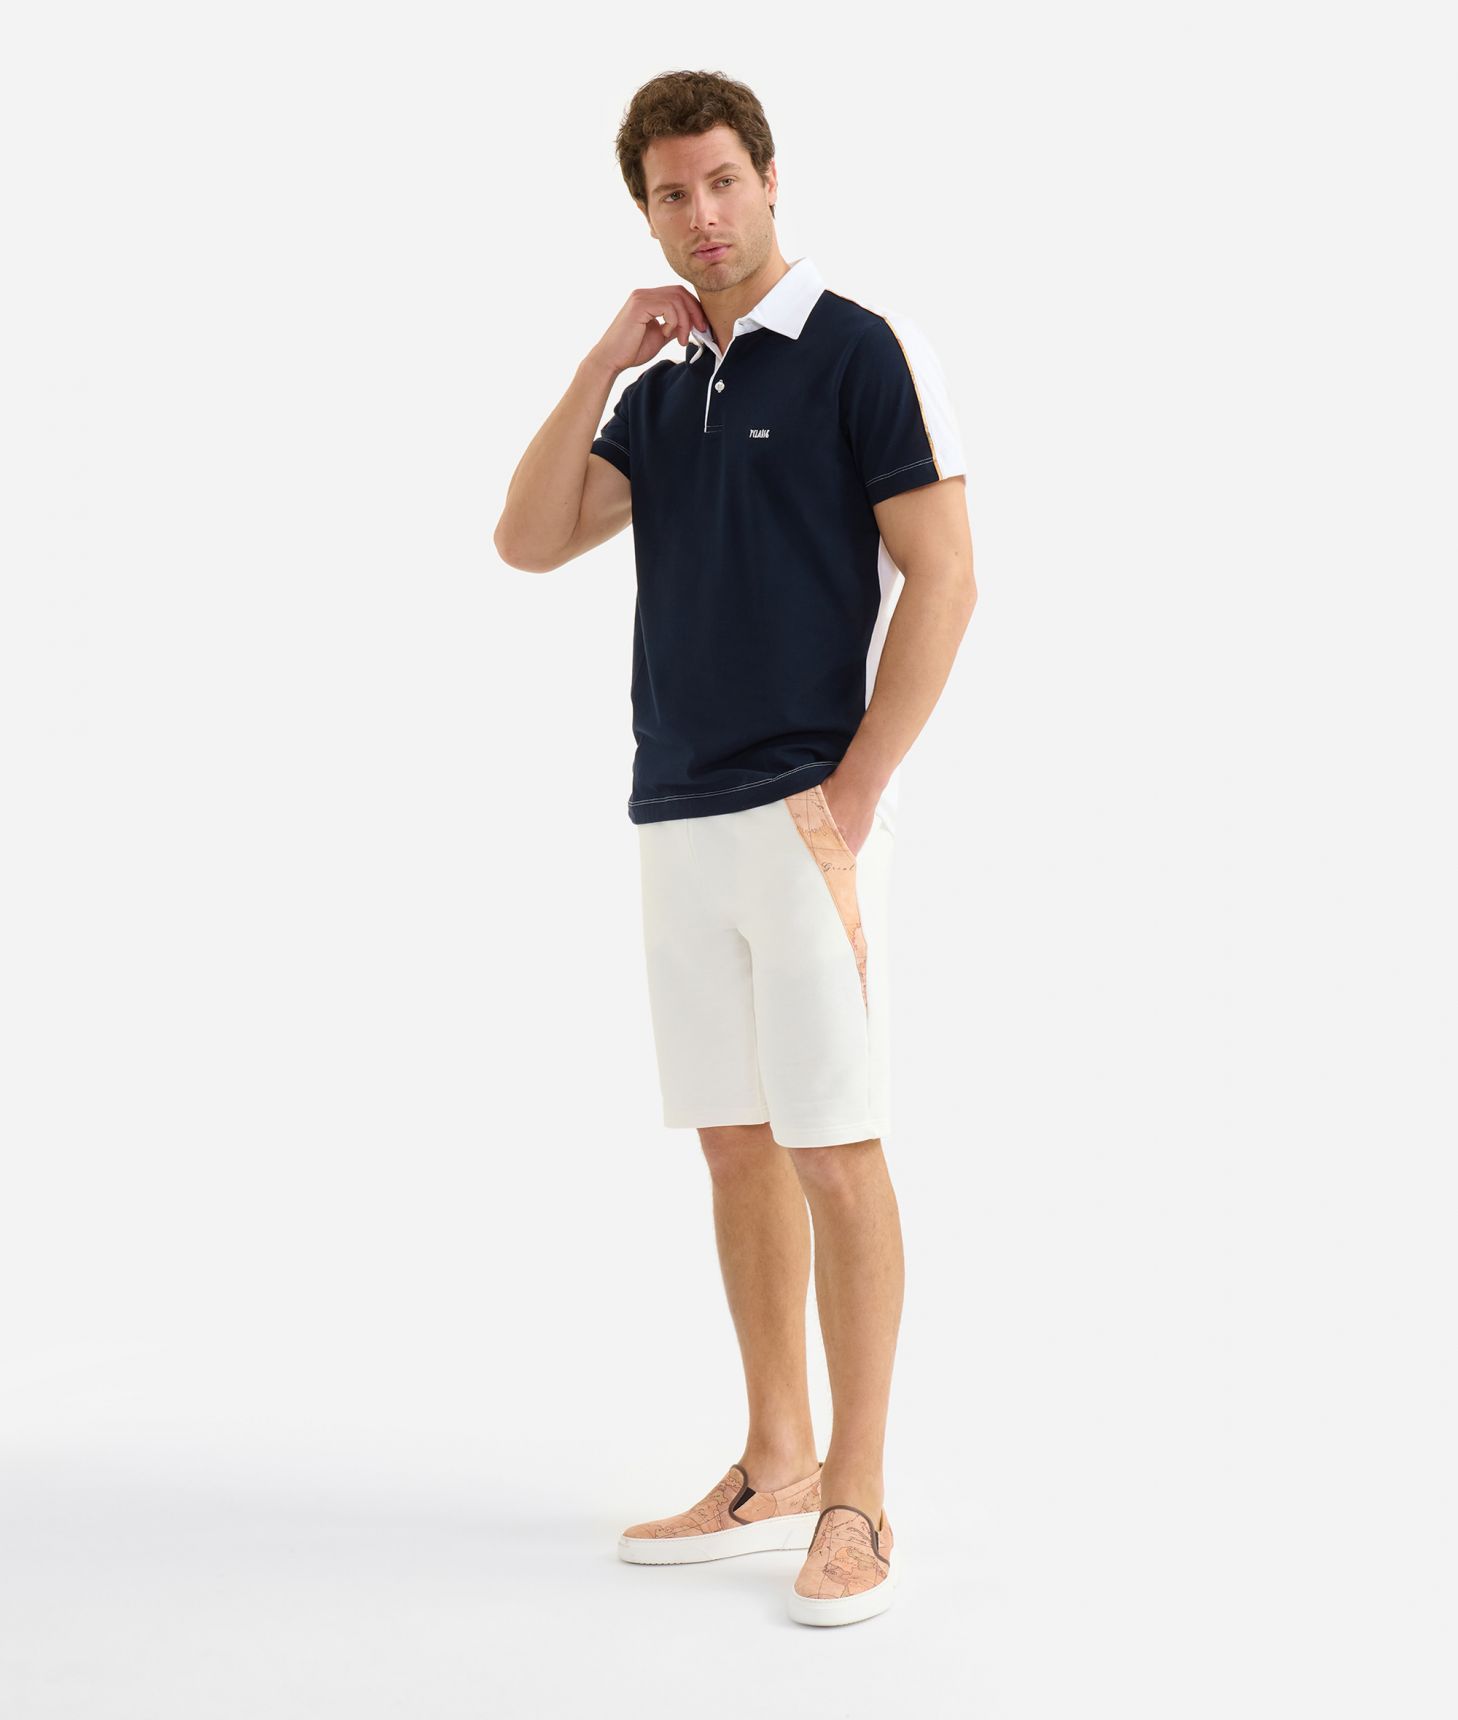 Piqué cotton jersey polo shirt with 1ᴬ Classe logo Navy Blue,front